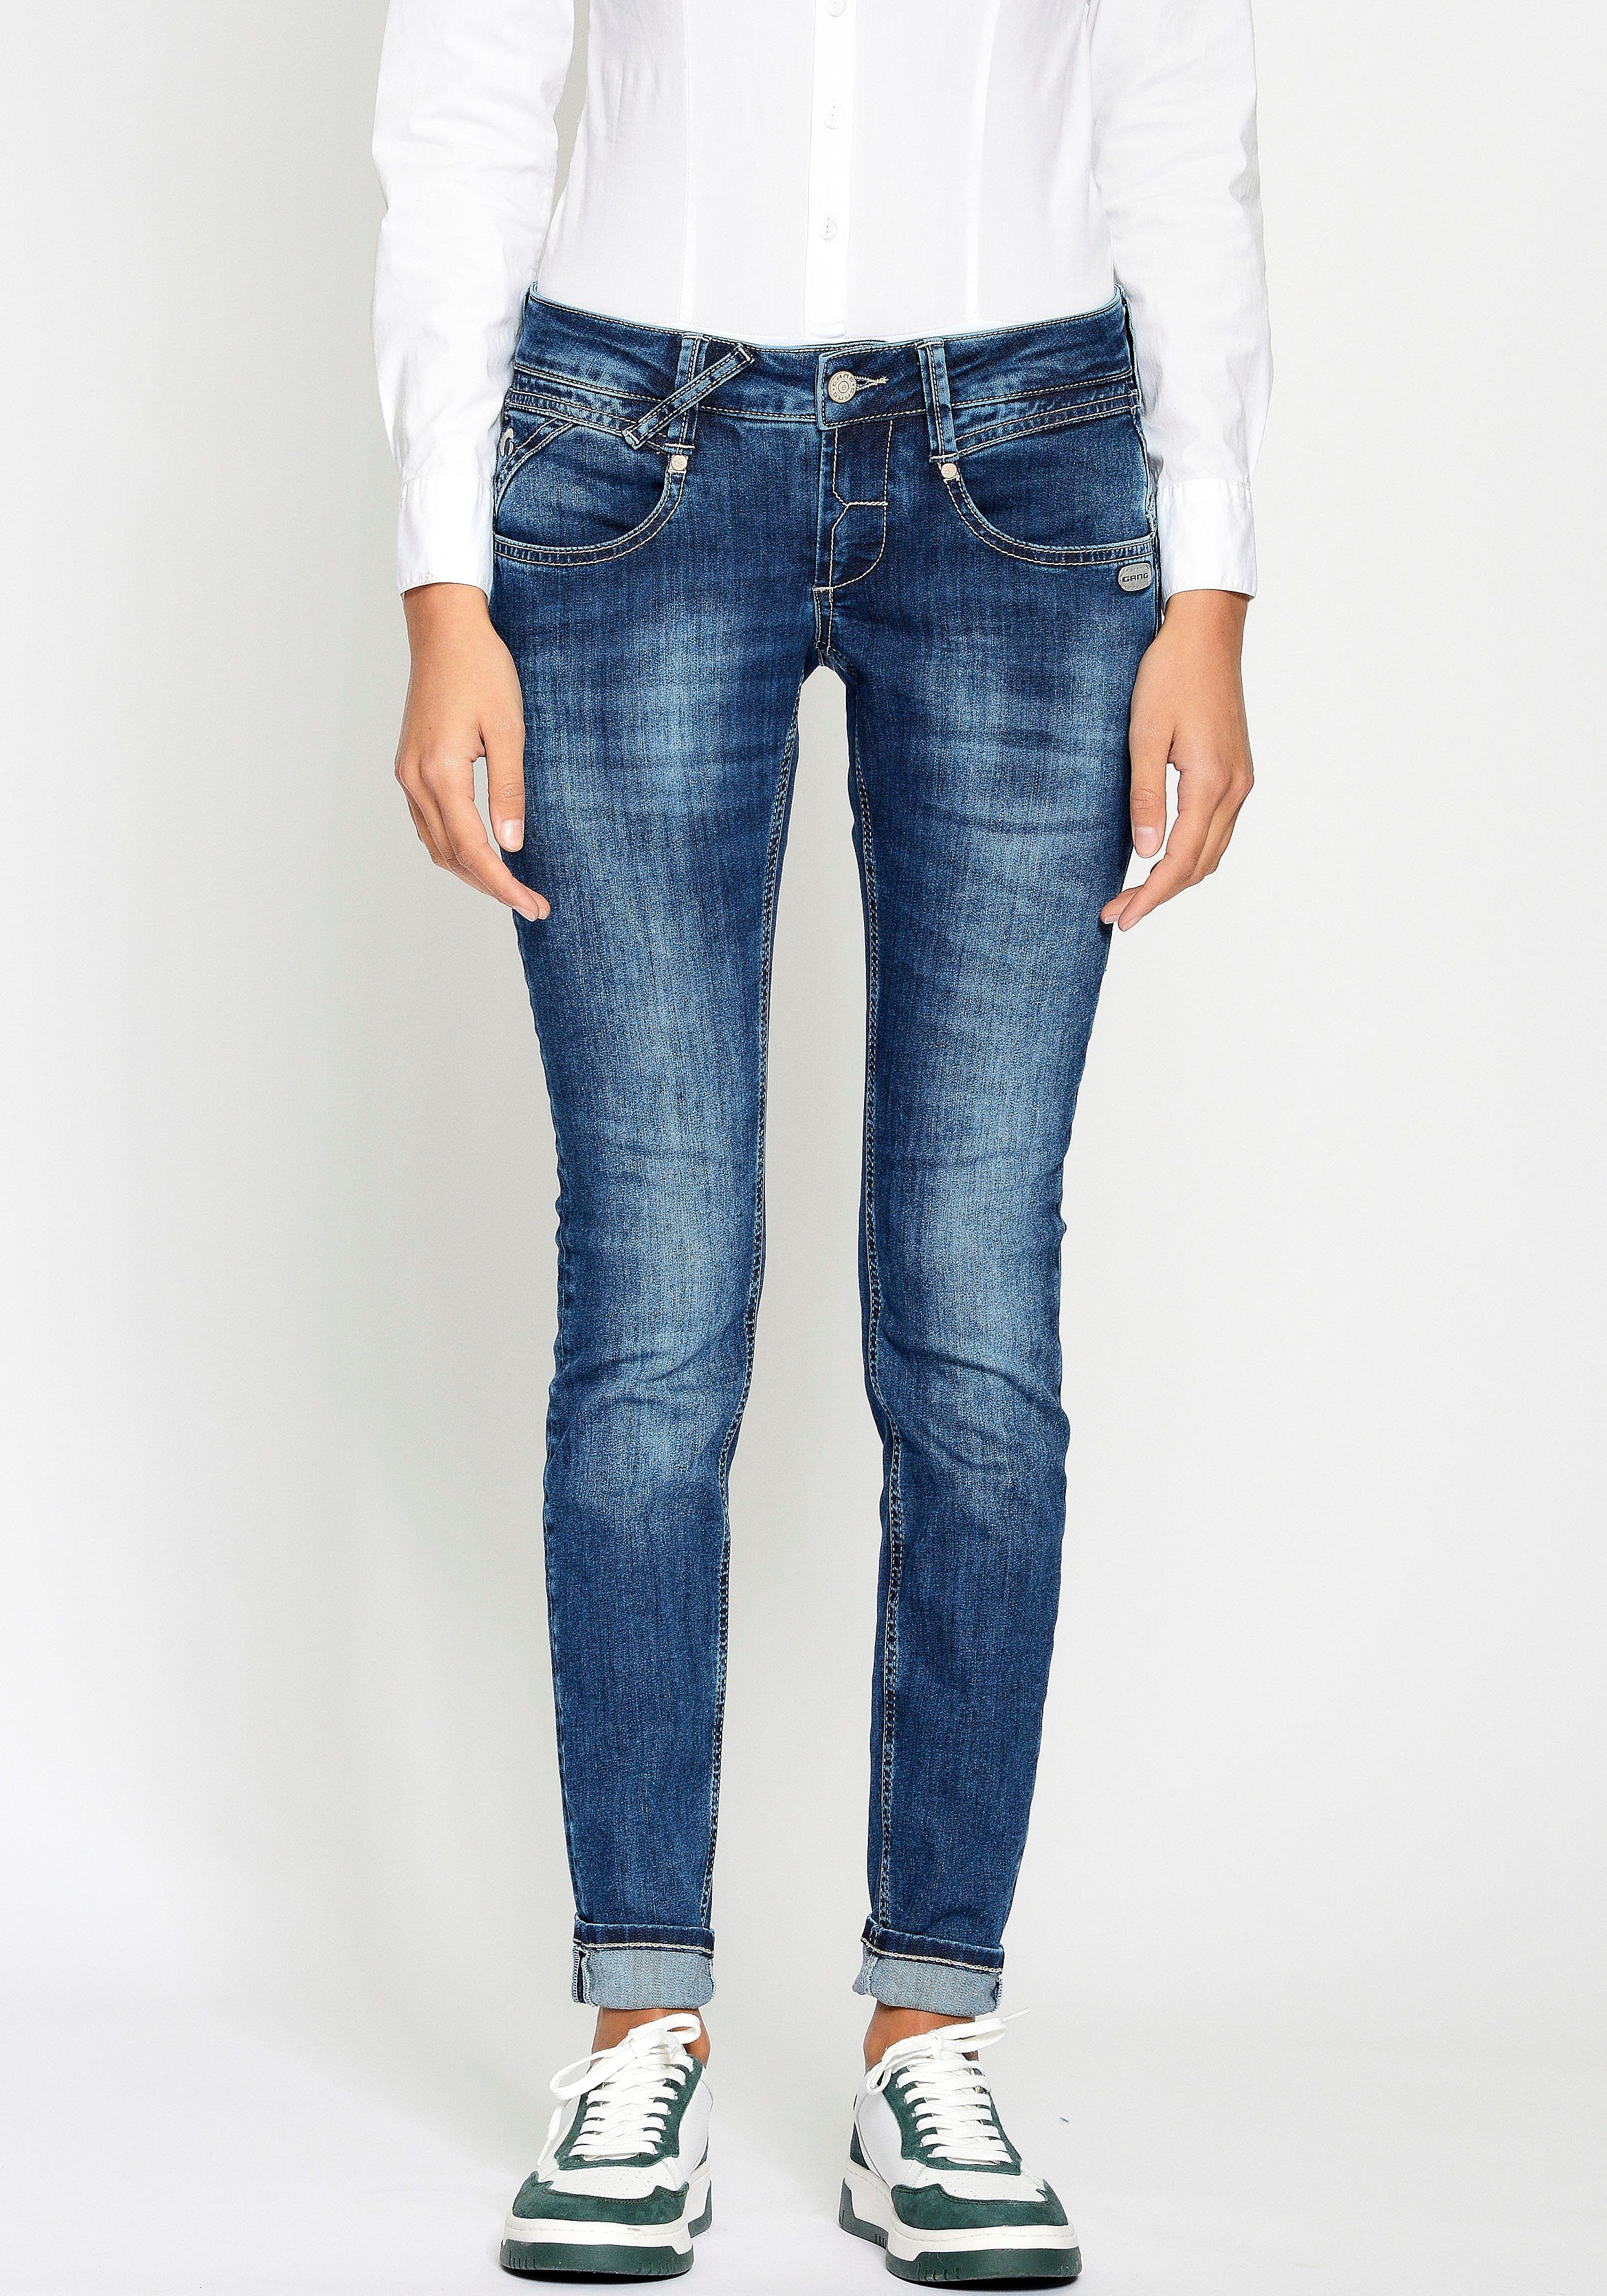 GANG Skinny-fit-Jeans 94Nena in authenischer Used-Waschung mid blue | Stretchjeans